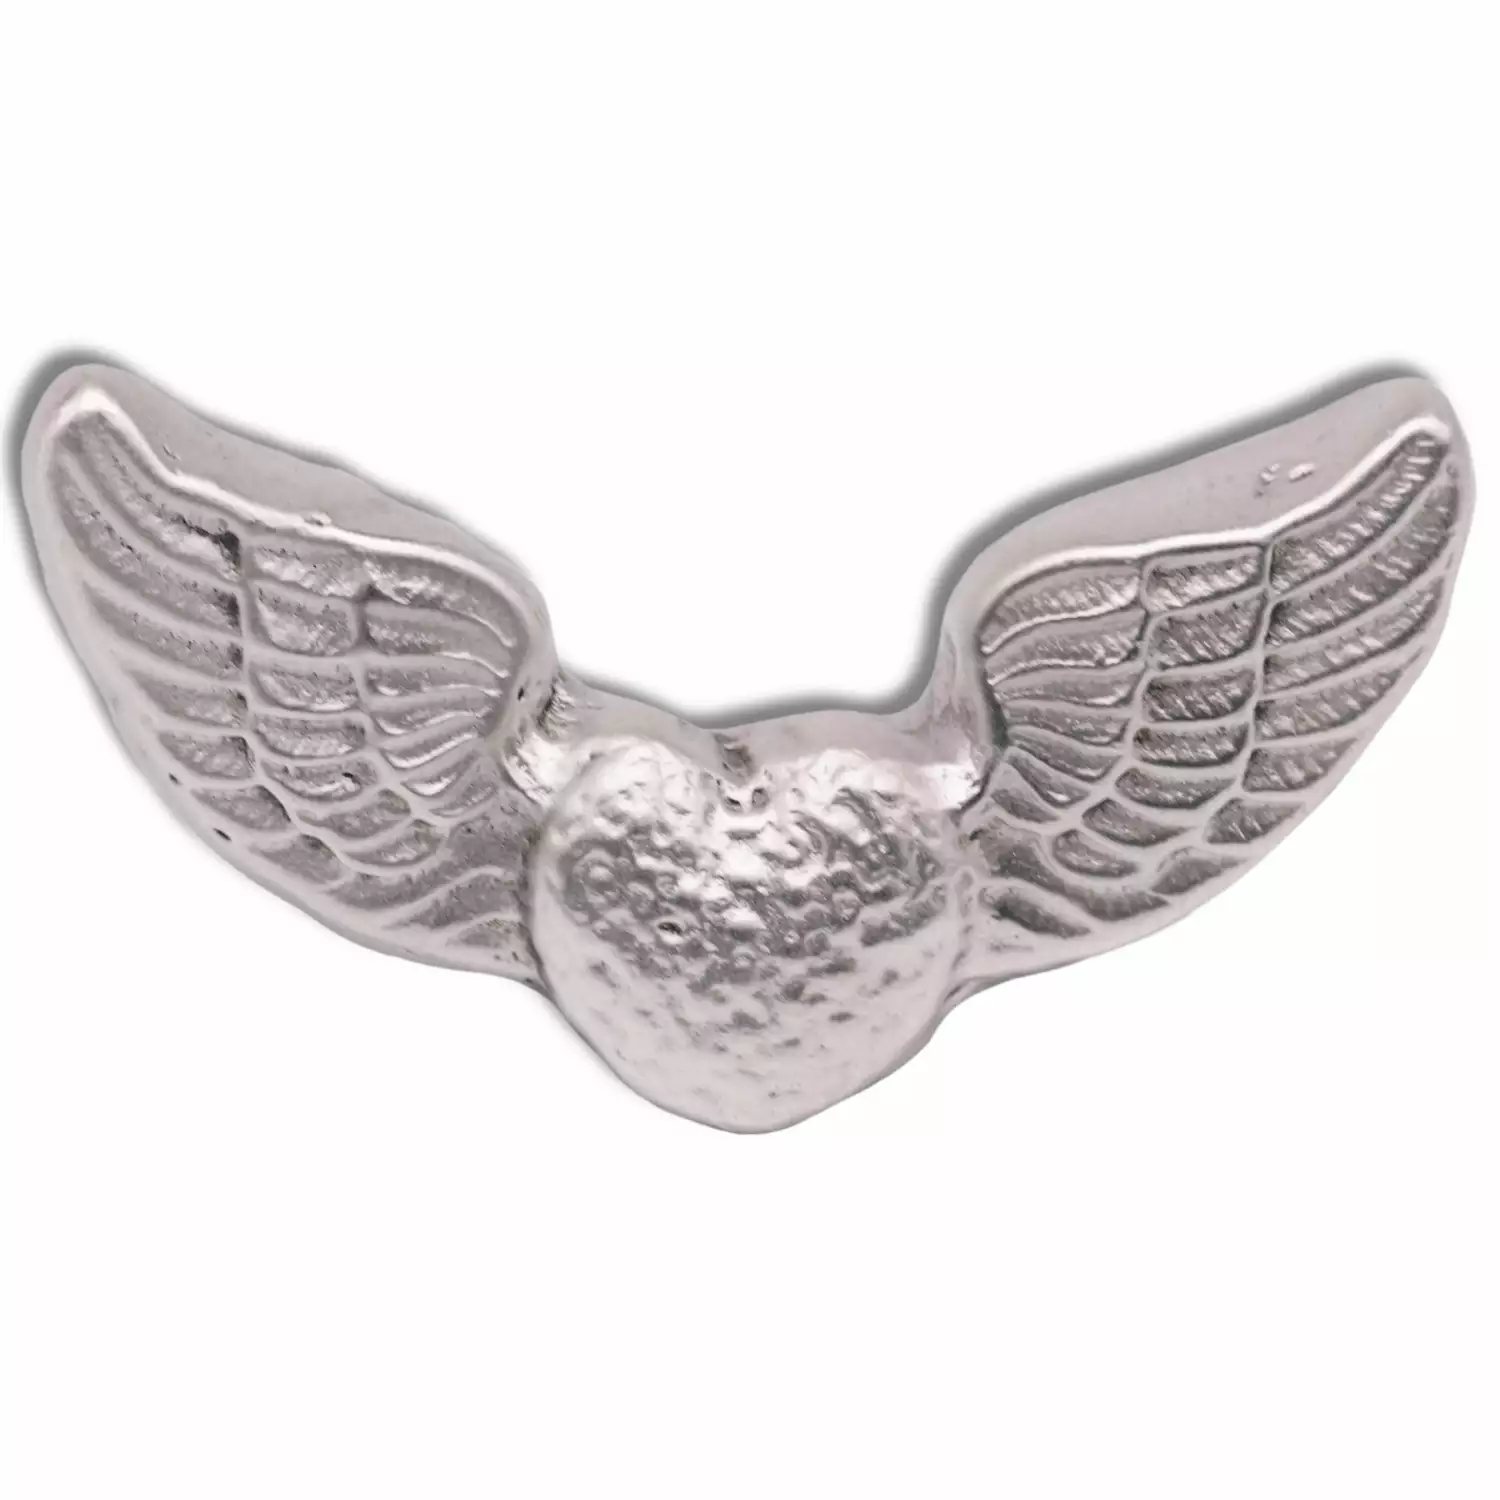 2 Troy Ounce Winged Heart (2)